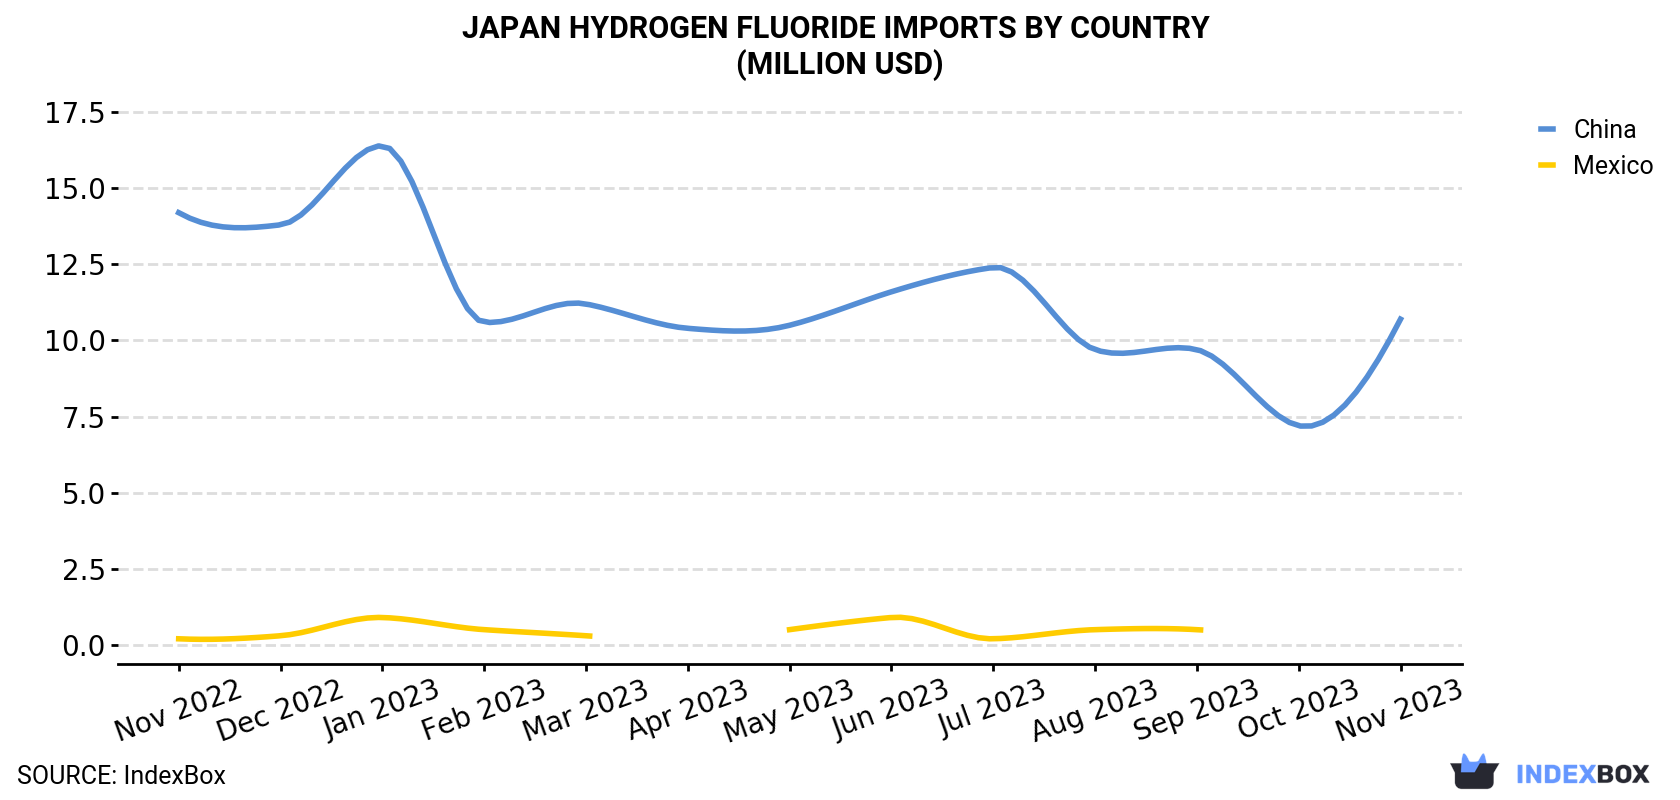 Japan Hydrogen Fluoride Imports By Country (Million USD)